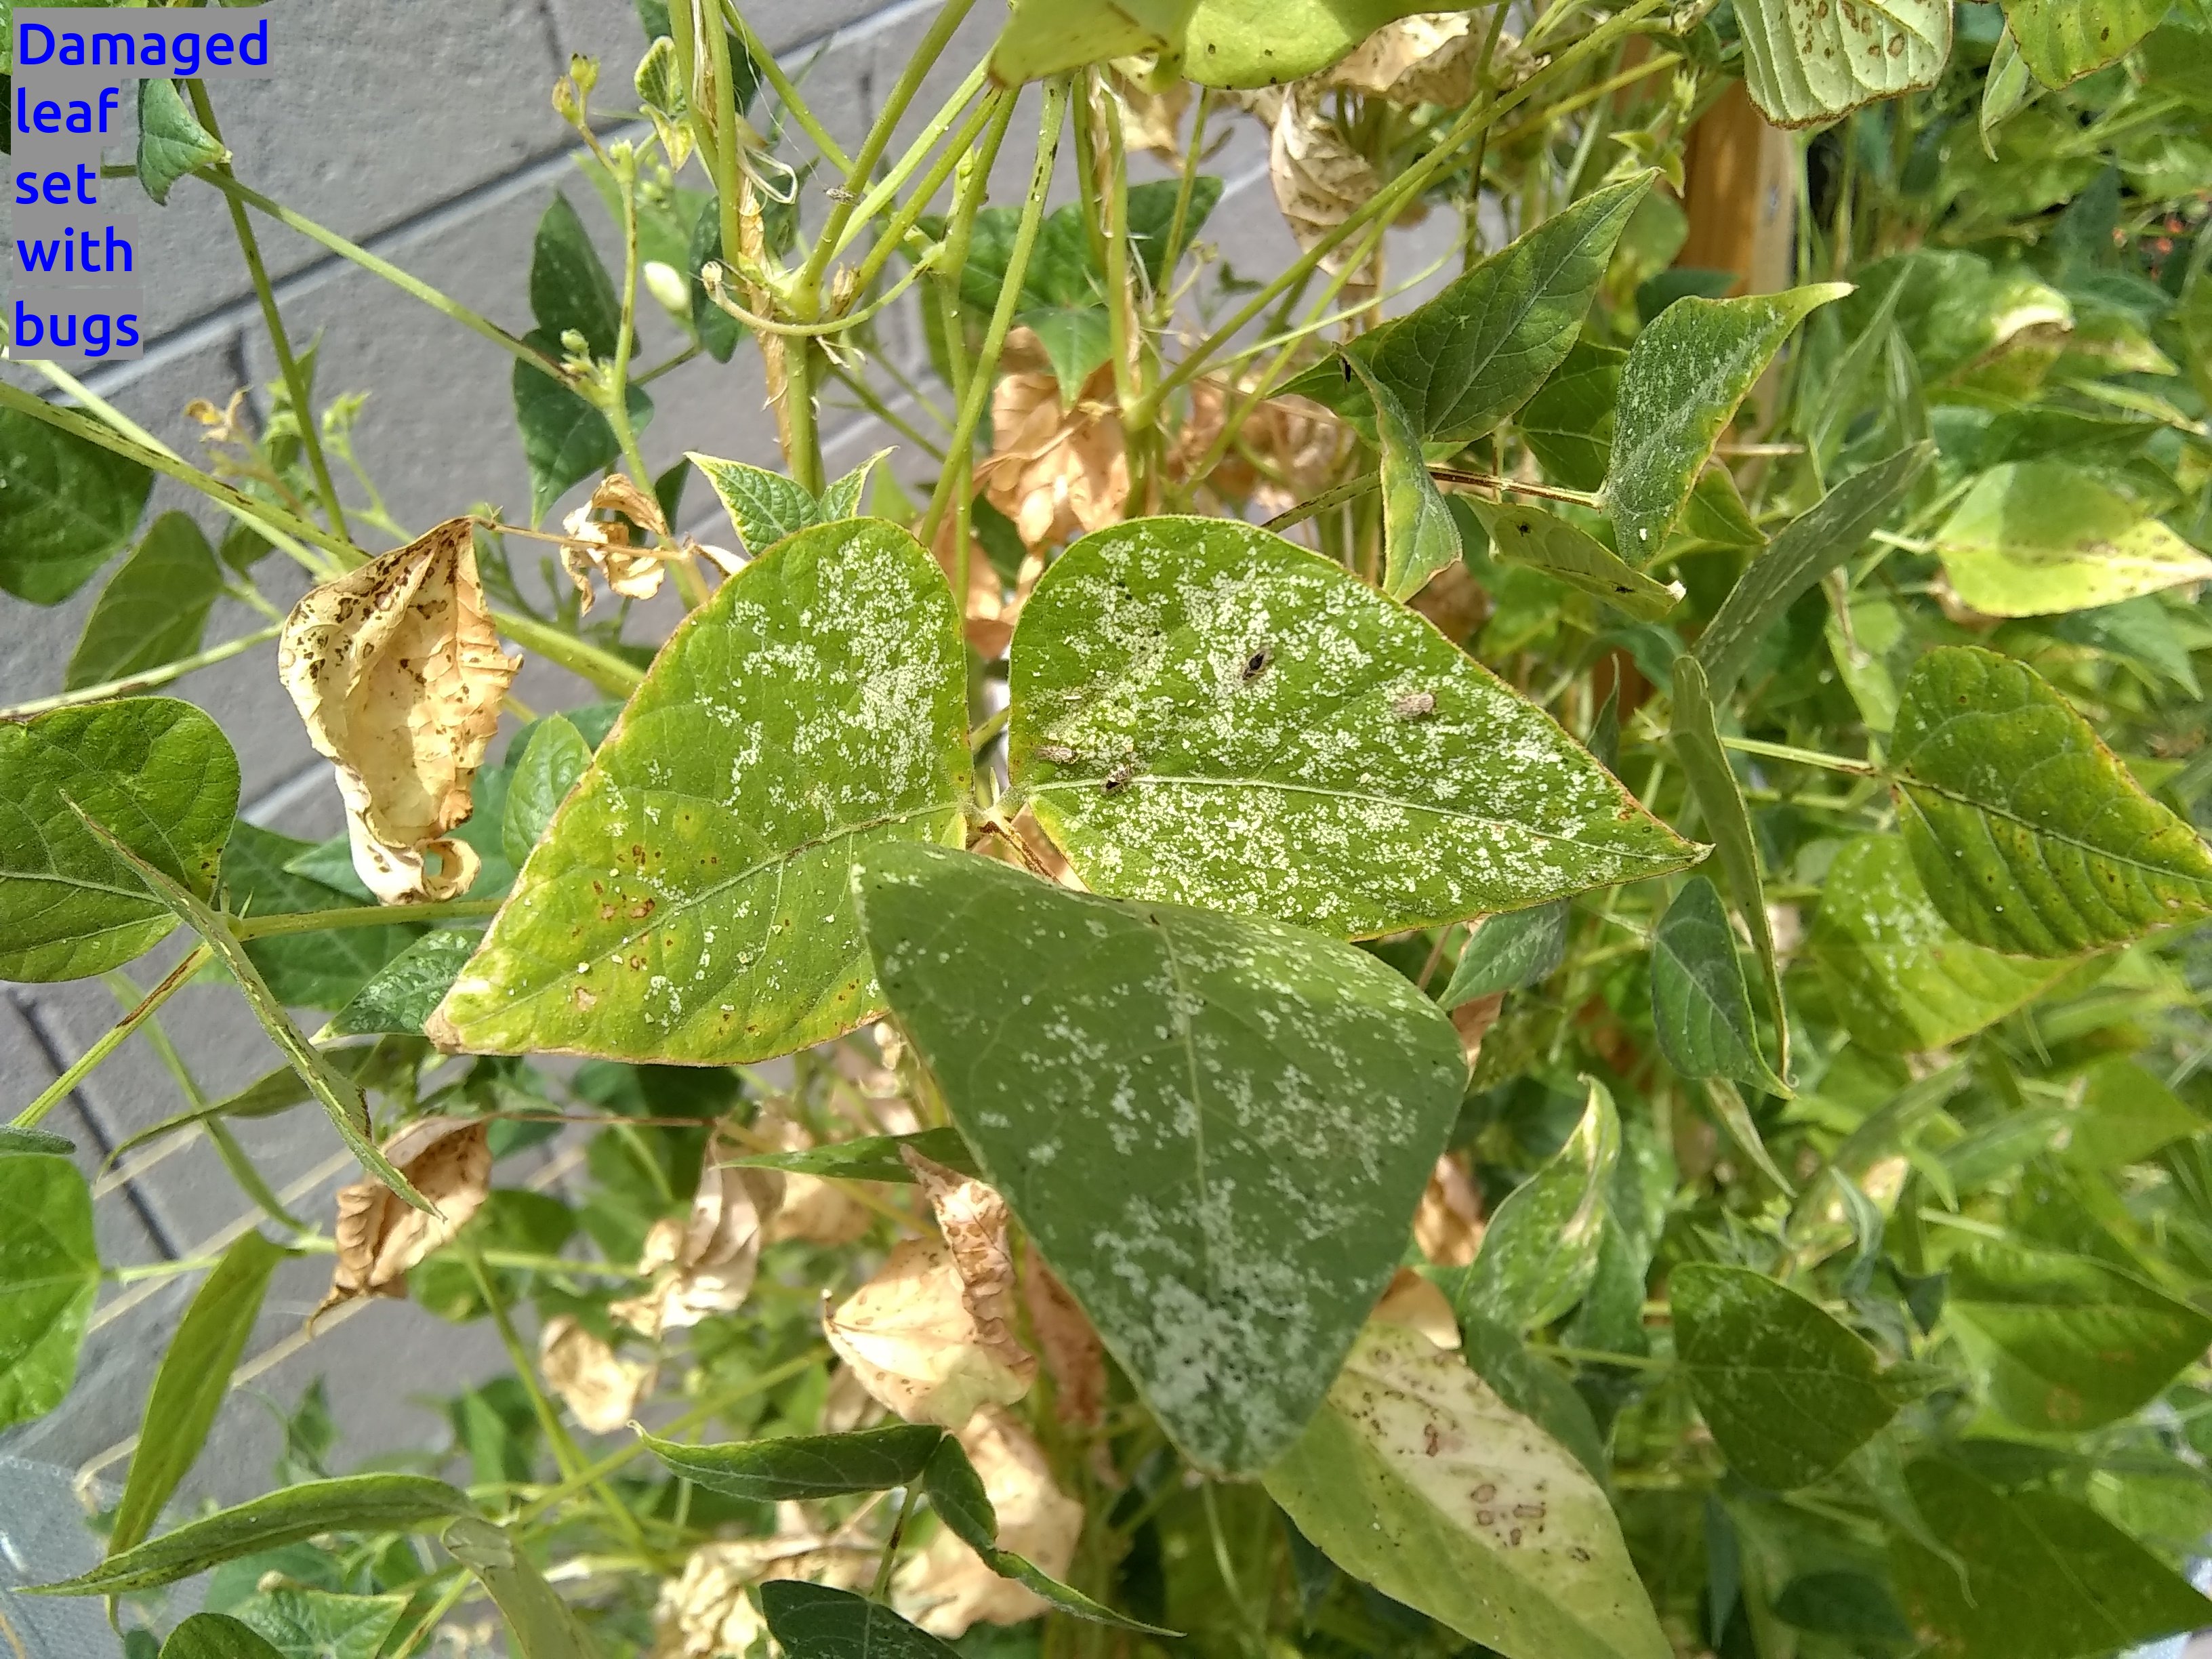 Damage from bugs and spray.